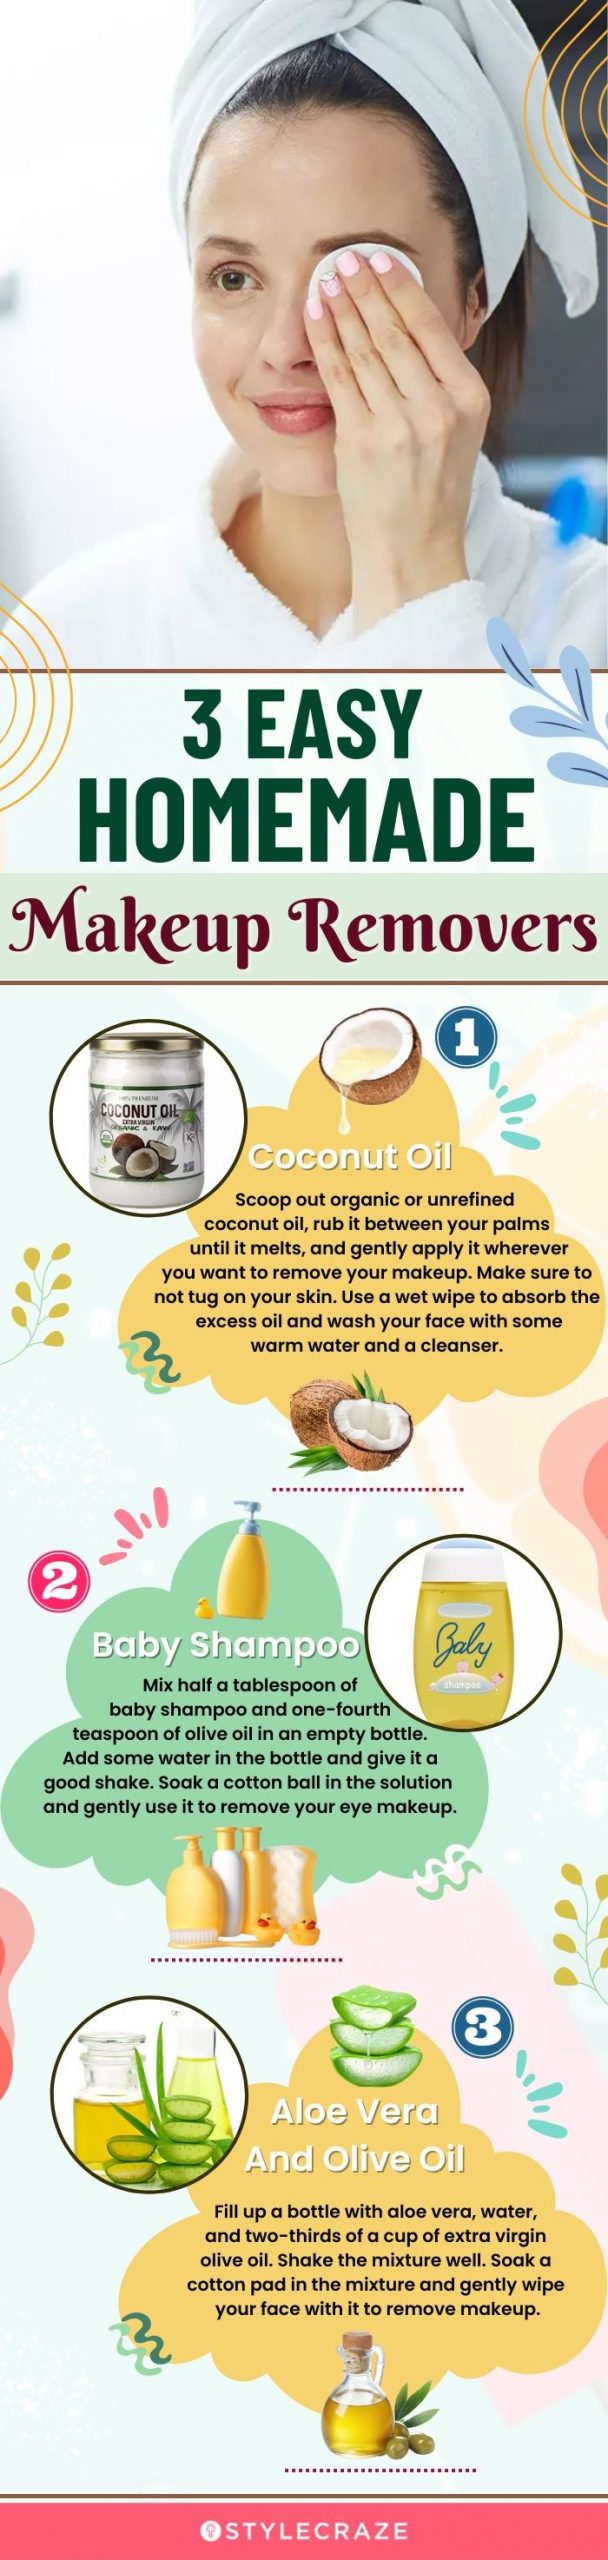 3 easy homemade makeup removers (infographic)